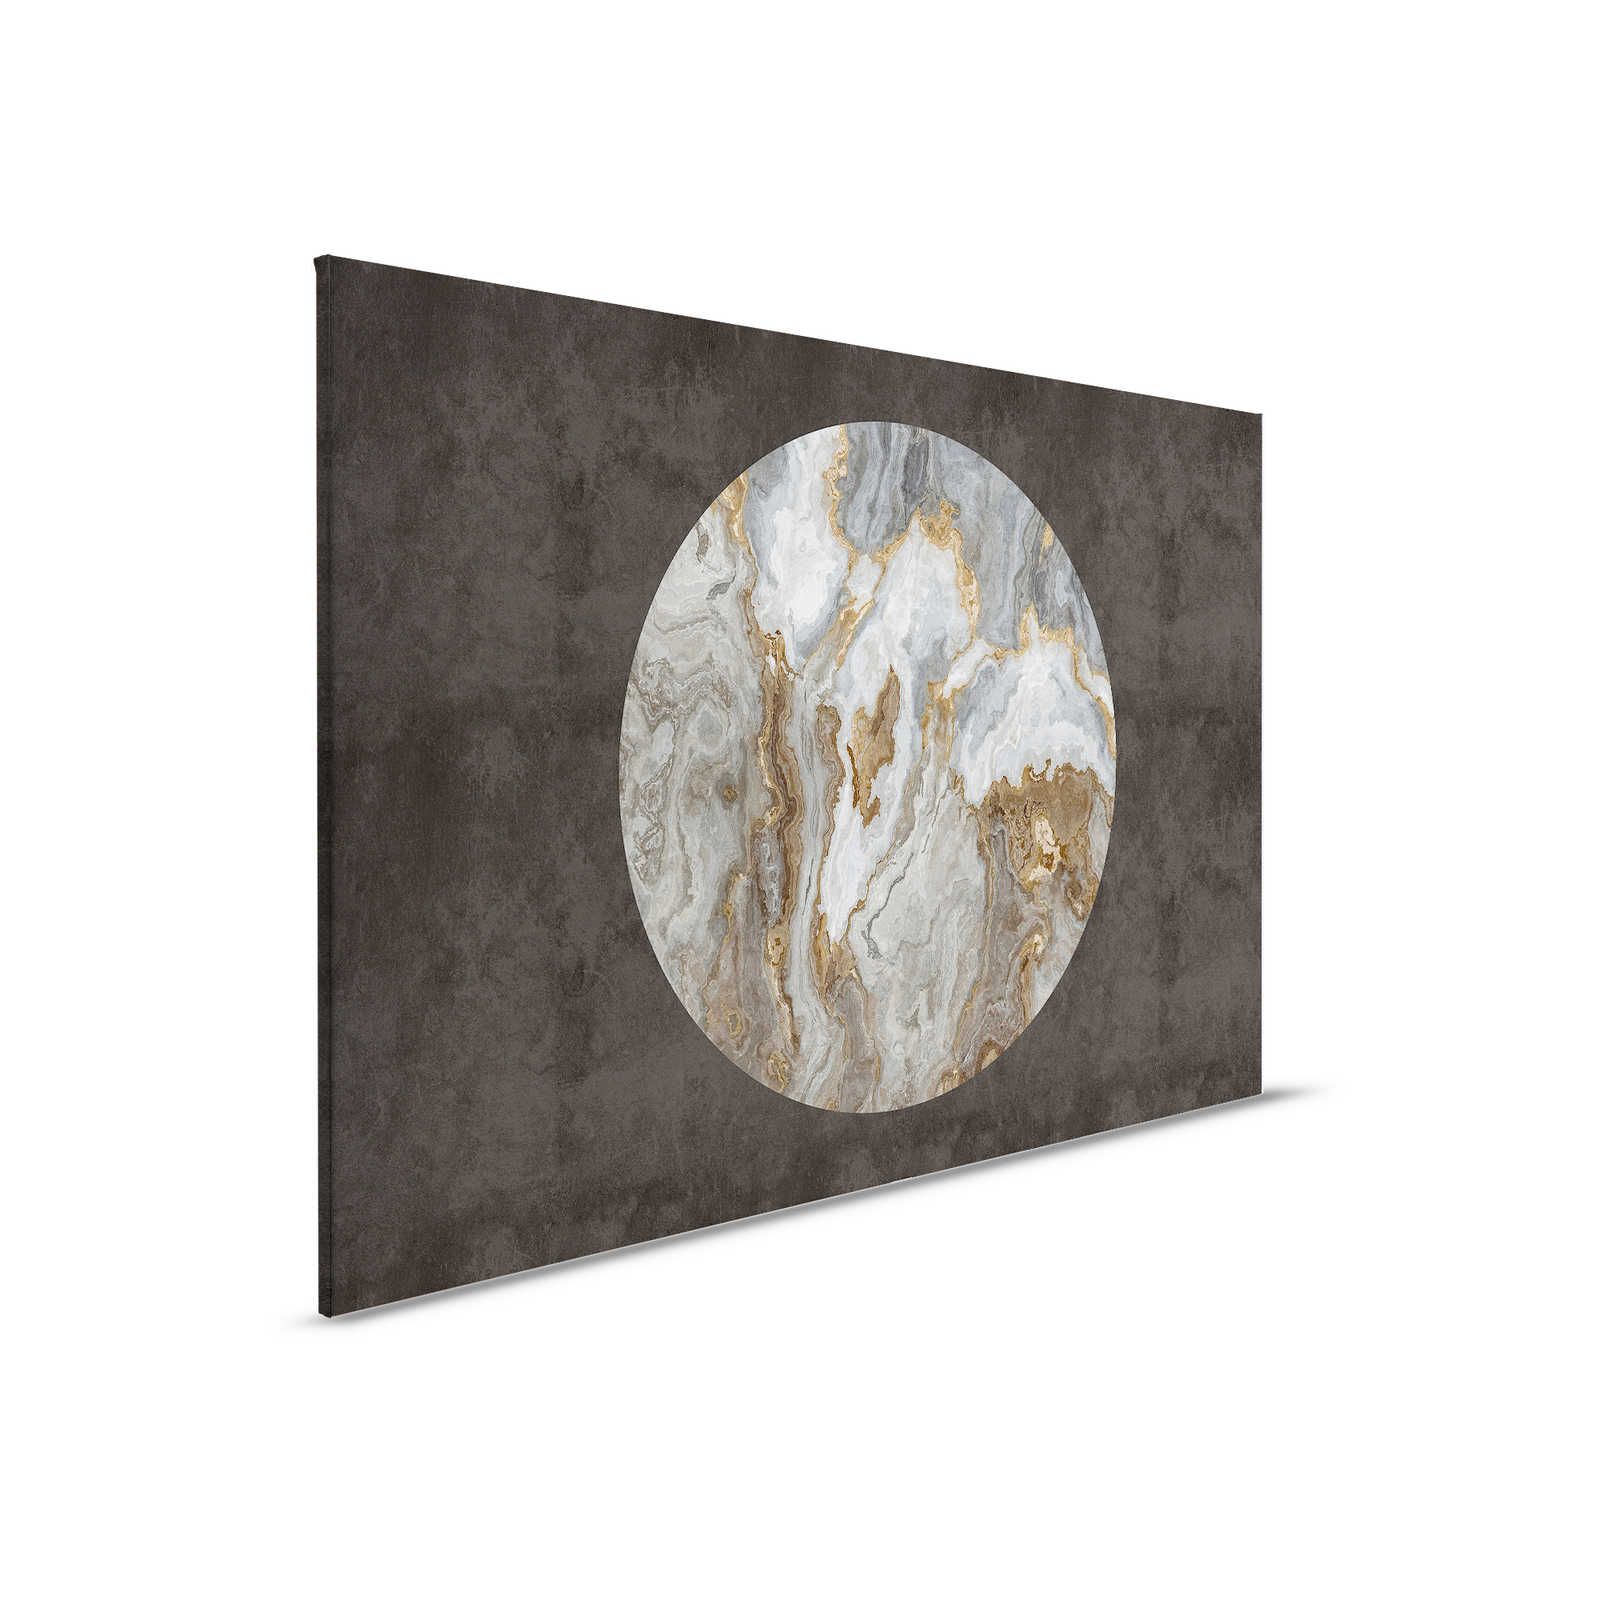         Luna 2 - Marble canvas picture Stone circle in front of black plaster optic - 0,90 m x 0,60 m
    